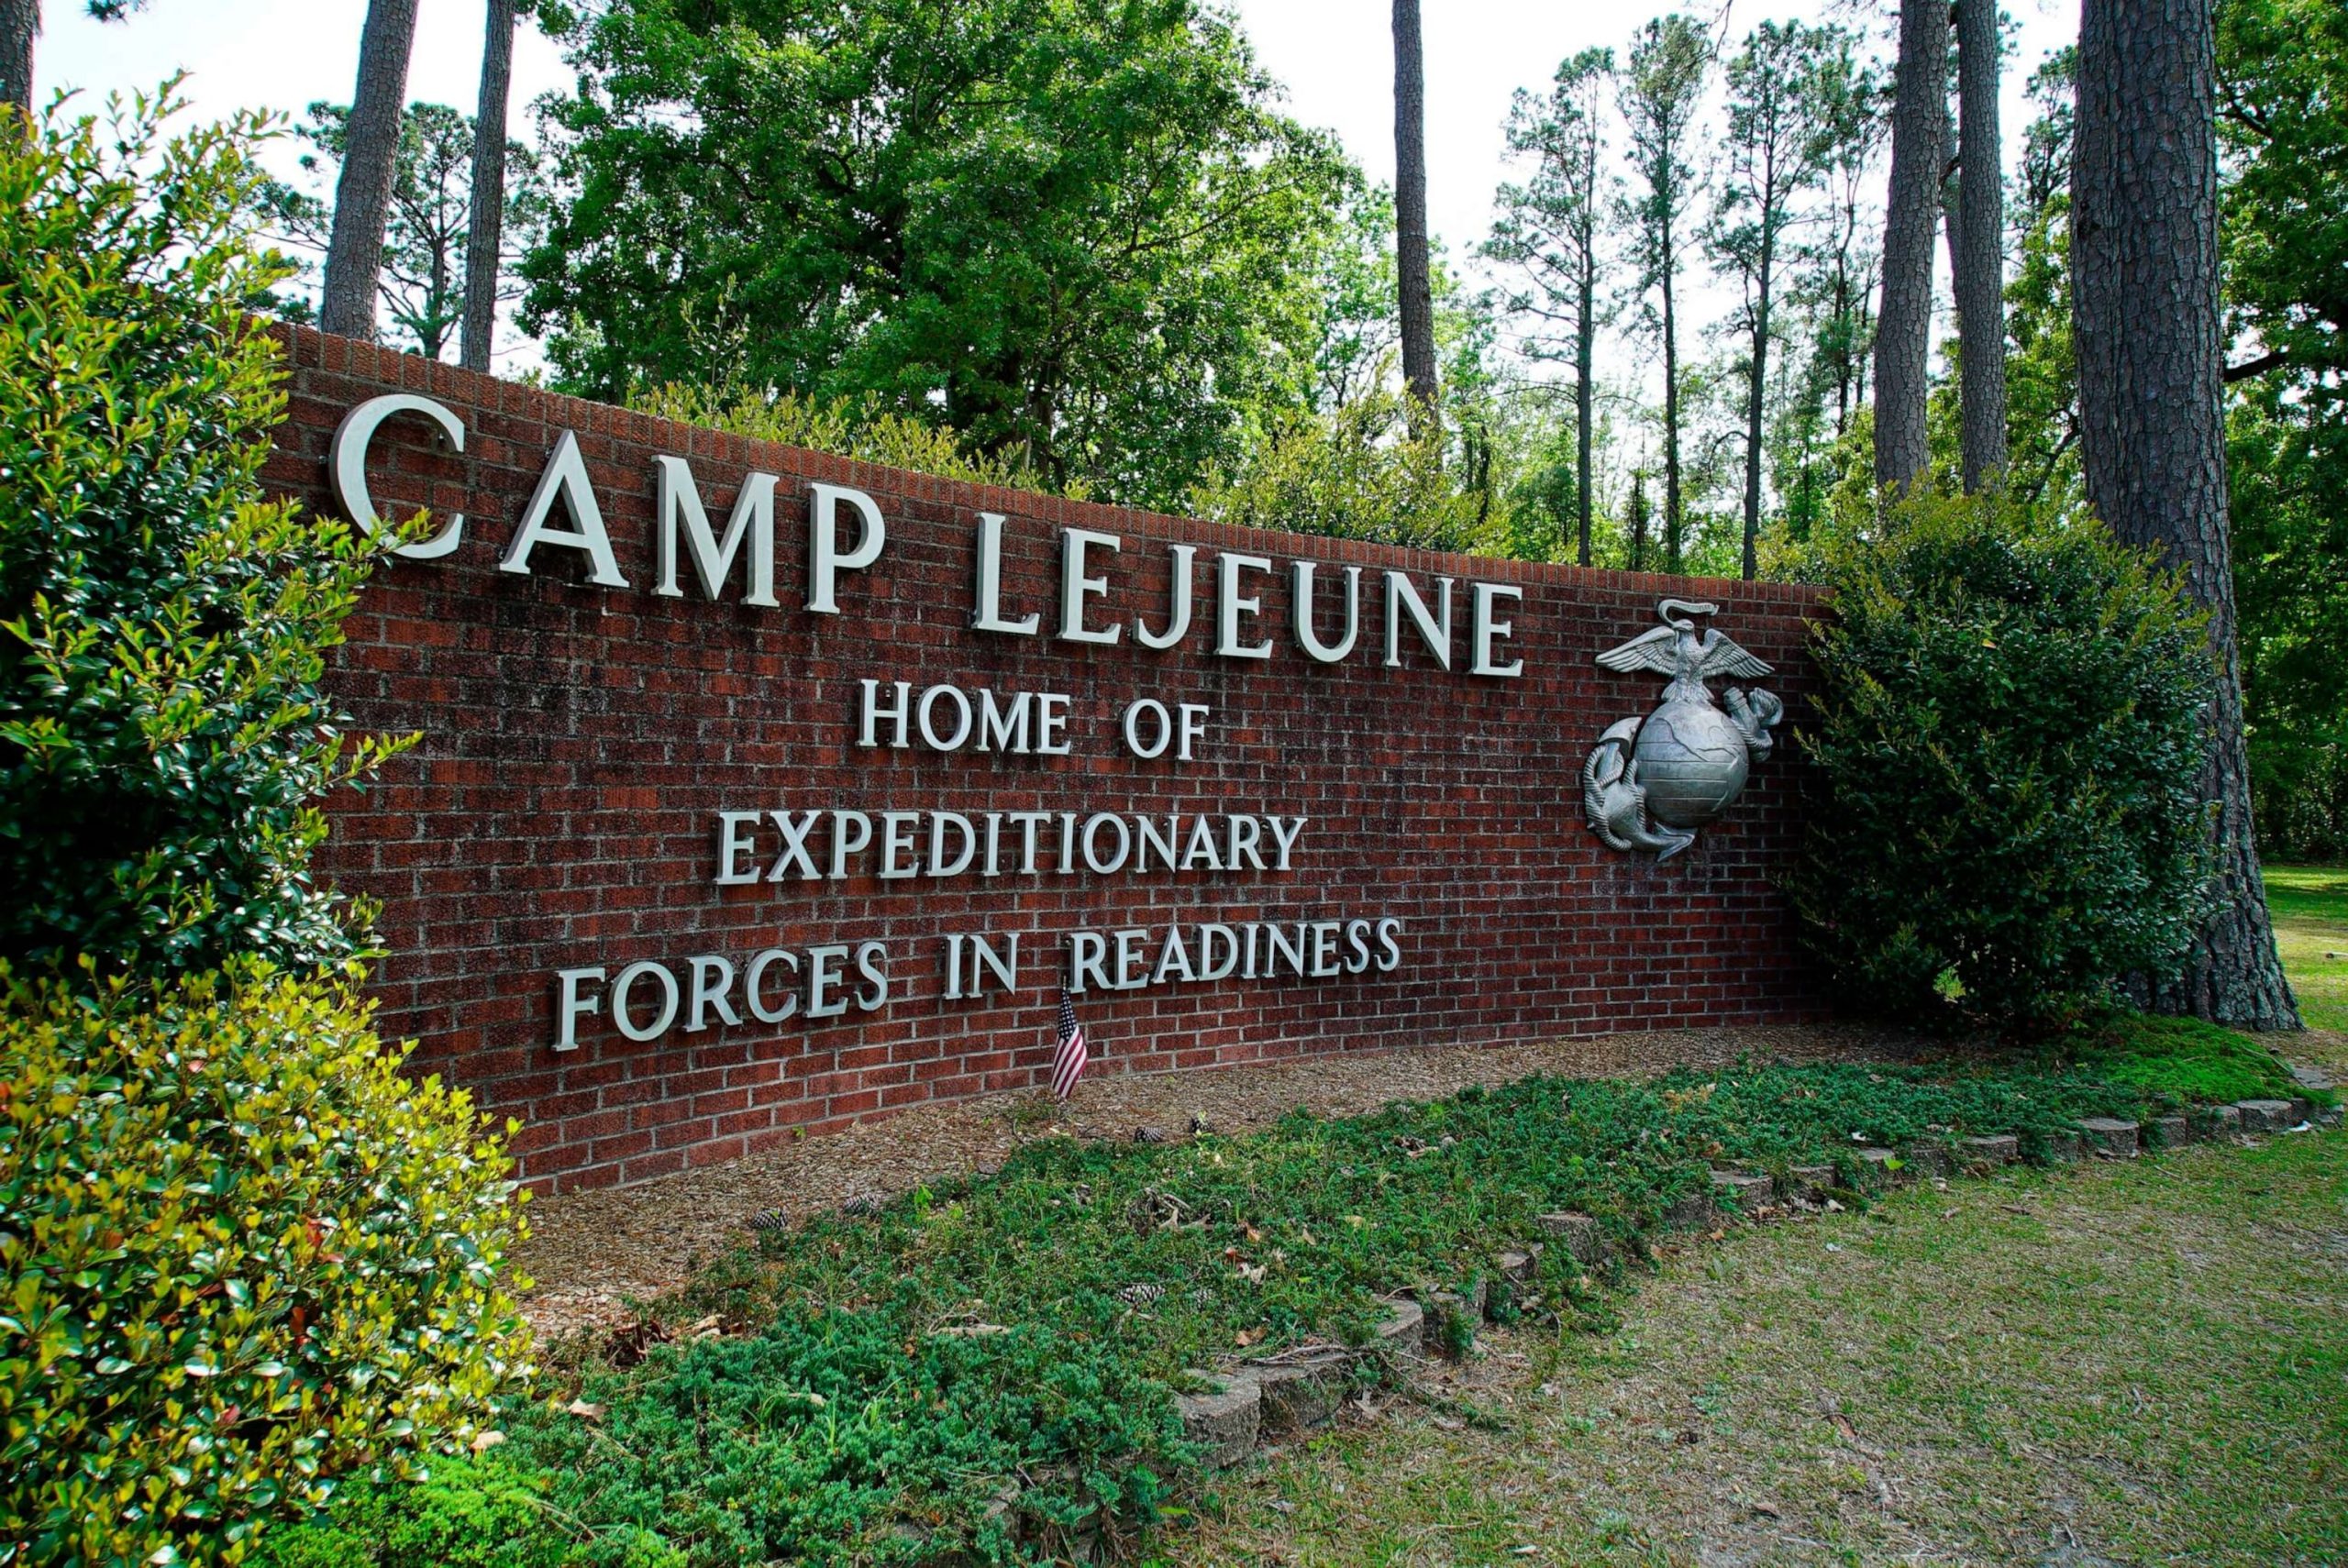 Marine Fatally Found at Camp Lejeune, Suspect Apprehended